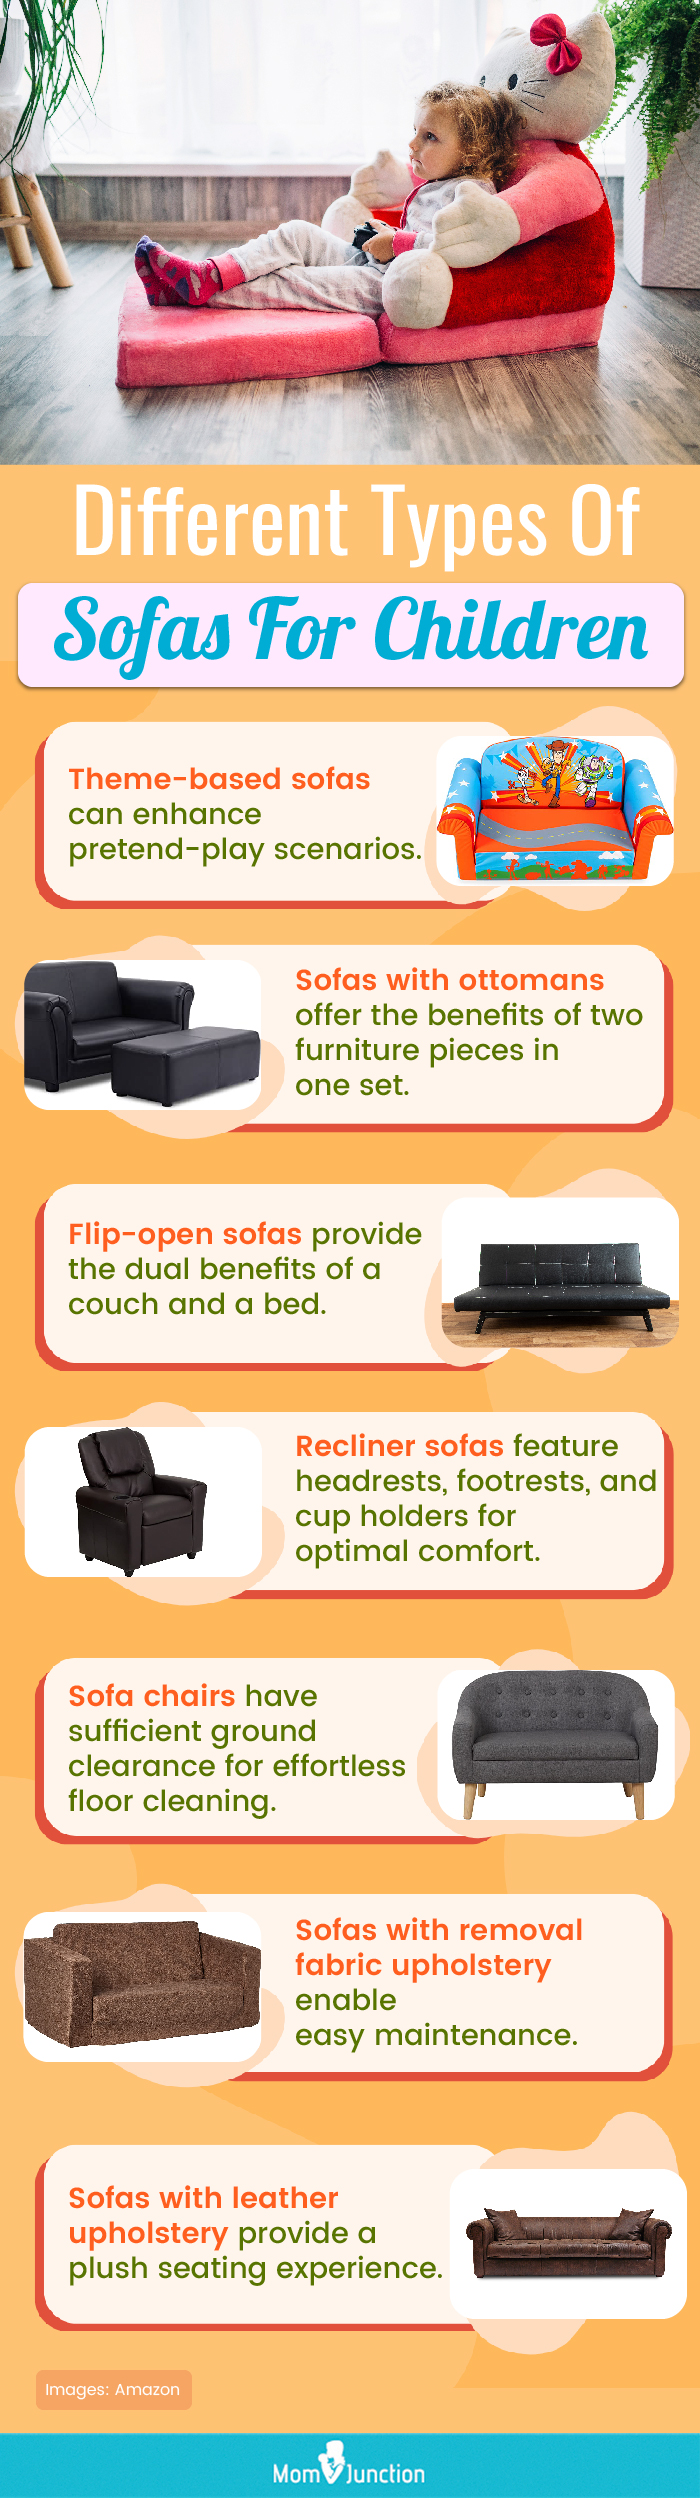 Different Types Of Sofas For Children (infographic)